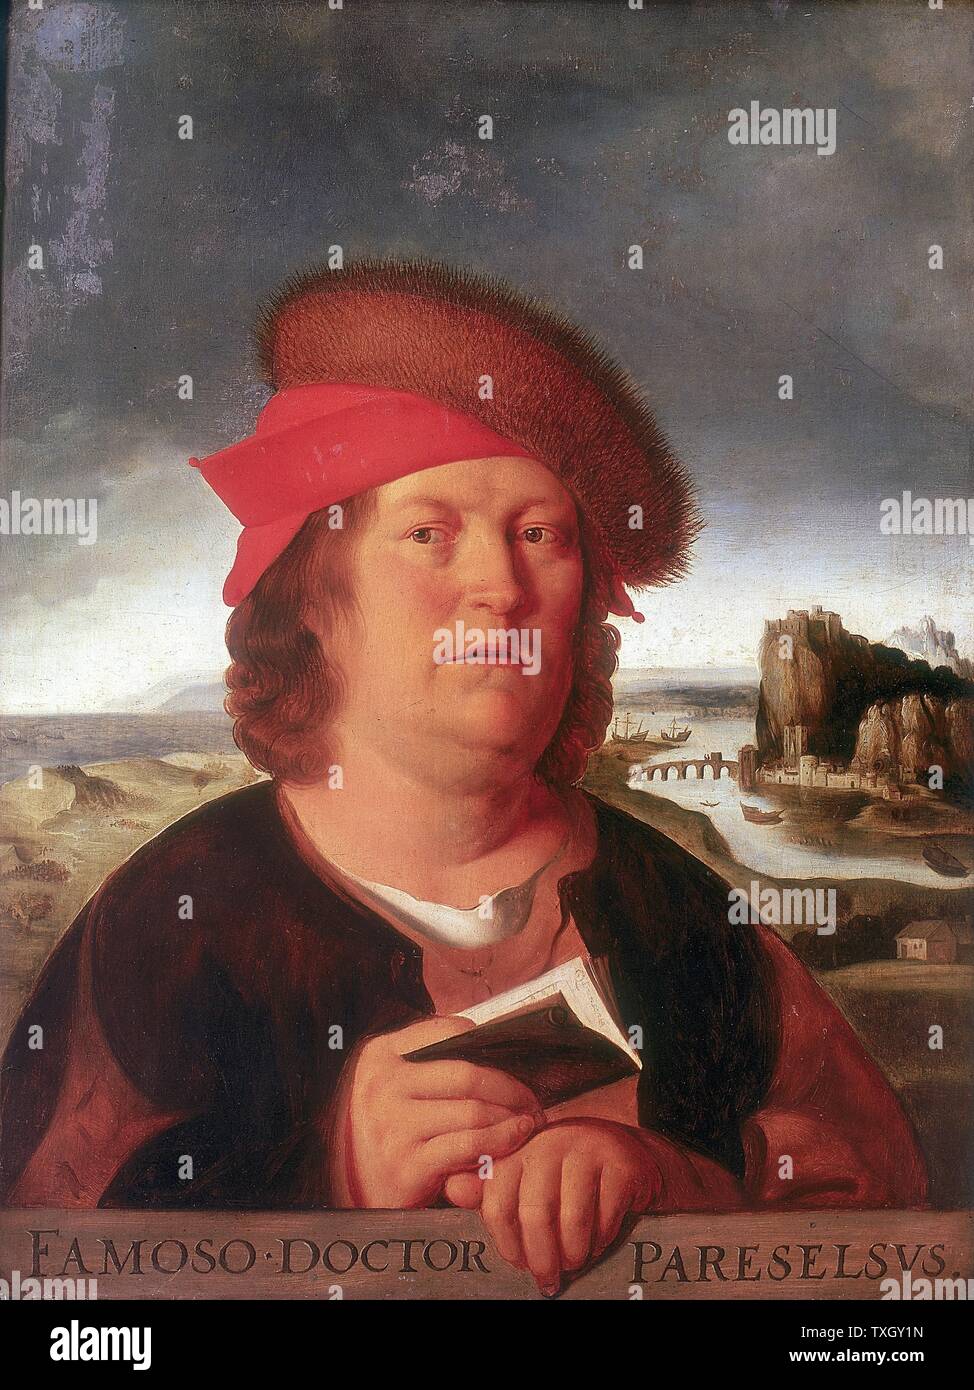 Paracelsus (Theophrastus Bombastus Von Hohenheim) 1493-1541. Swiss-born German physician and alchemist. First to describe Silicosis. Connected Goitre with minerals in drinking water. Recognised importance of chemistry in medicine (Iatrochemistry) Portrait Louvre, Paris Stock Photo